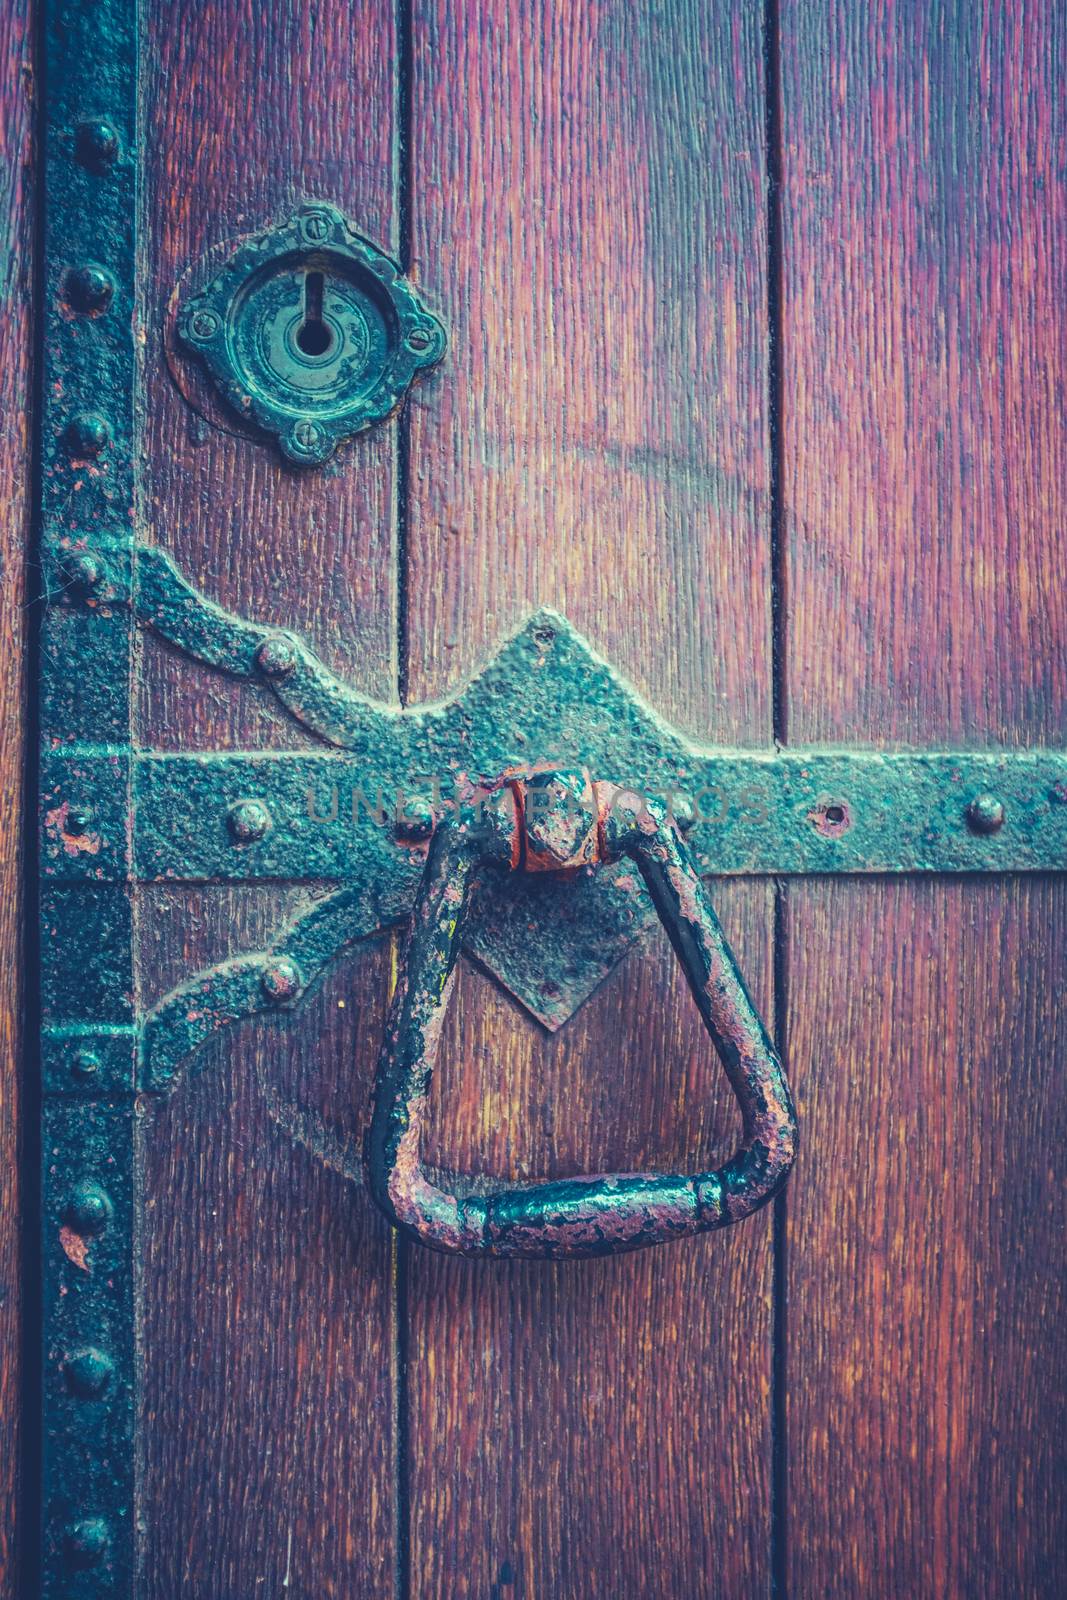 Ancient Heavy Door At A British Medieval University With Iron Handle And Hinges